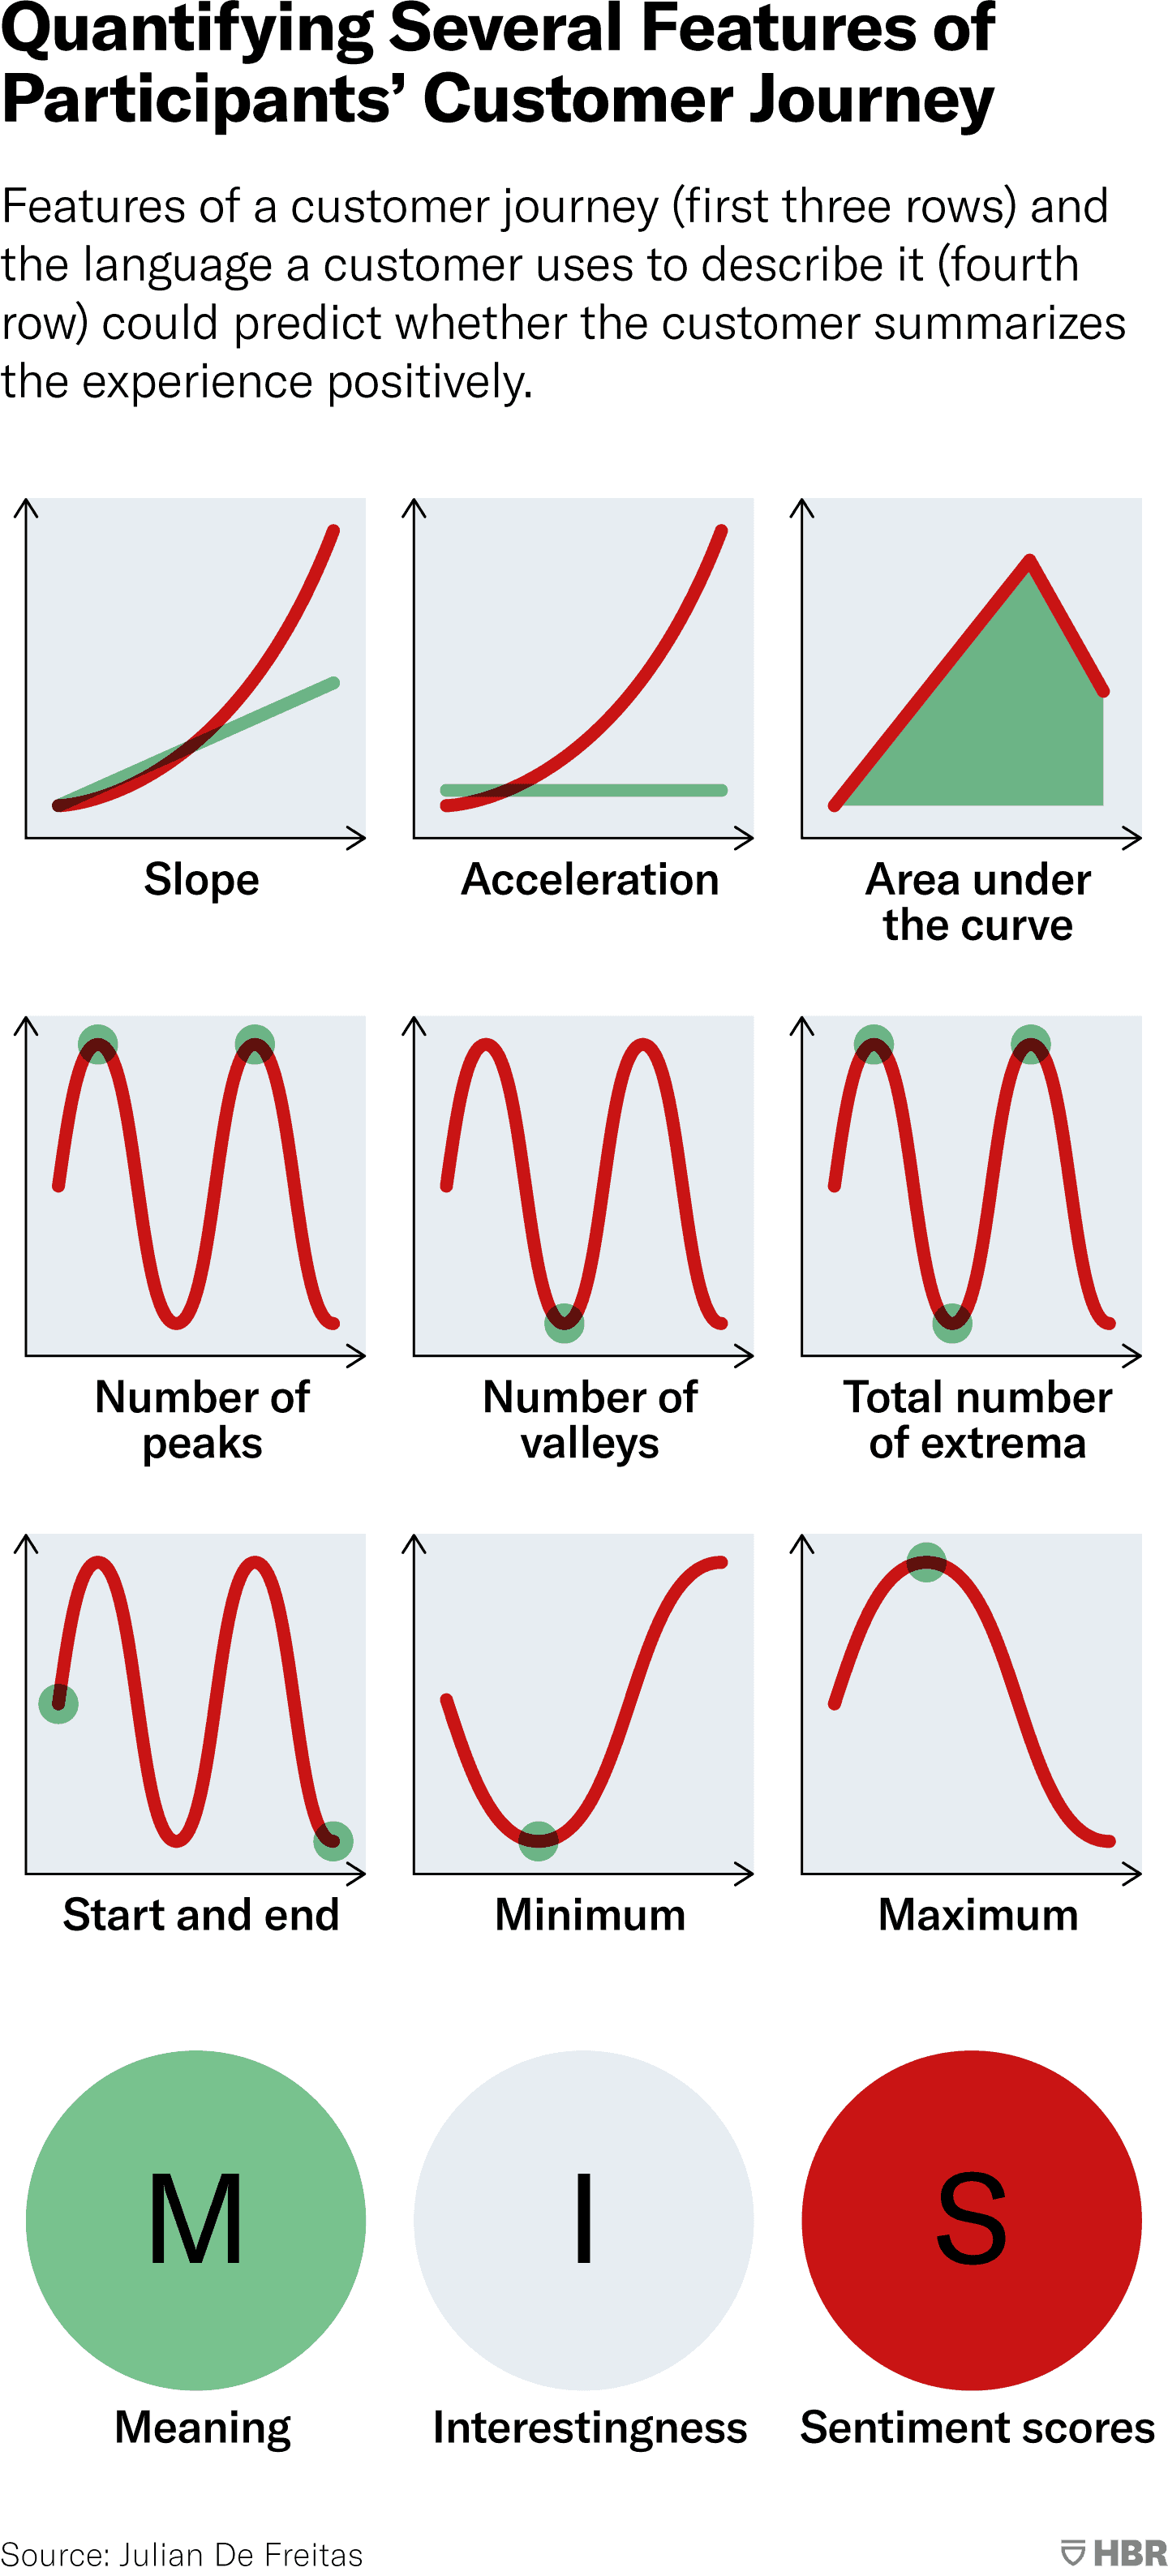 Features of a customer journey and the language a customer uses to describe it can predict whether the customer summarizes an experience positively. This chart shows nine features of a customer experience journey, represented as plotted lines and indicating changing satisfaction from the beginning to the end of an experience. The features include slope, acceleration, area under the curve, number of peaks or high points, number of valleys or low points, total number of extrema or peaks and valleys, start and end points, minimum or lowest point, and maximum or highest point. Features of the language used by customers to describe the journey include meaning, interestingness, and sentiment scores. Source: Julian De Freitas